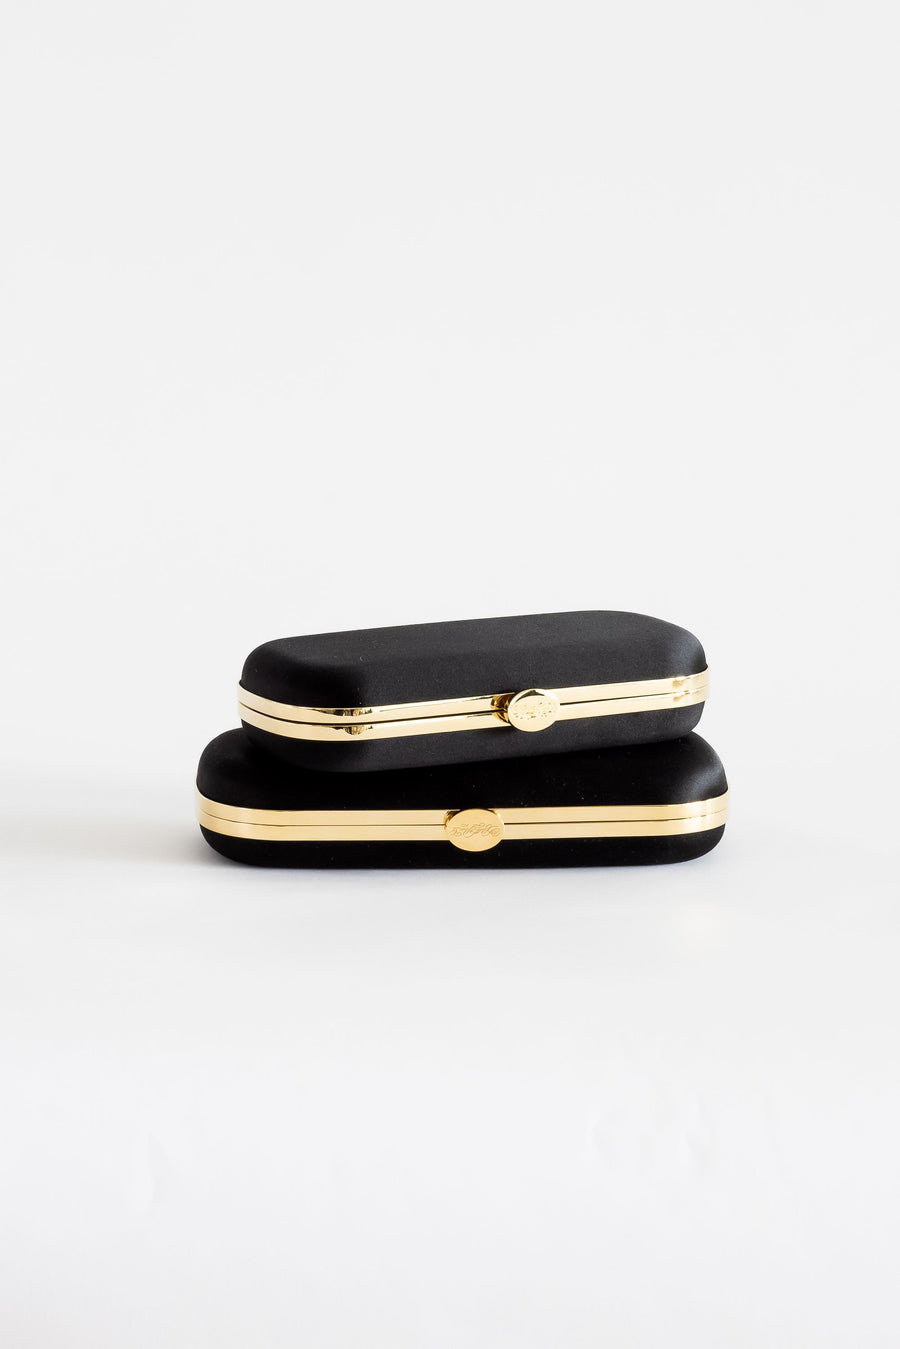 A The Bella Rosa Collection designer black Bella Clutch Black Petite purse with gold-tone hardware on a white background.